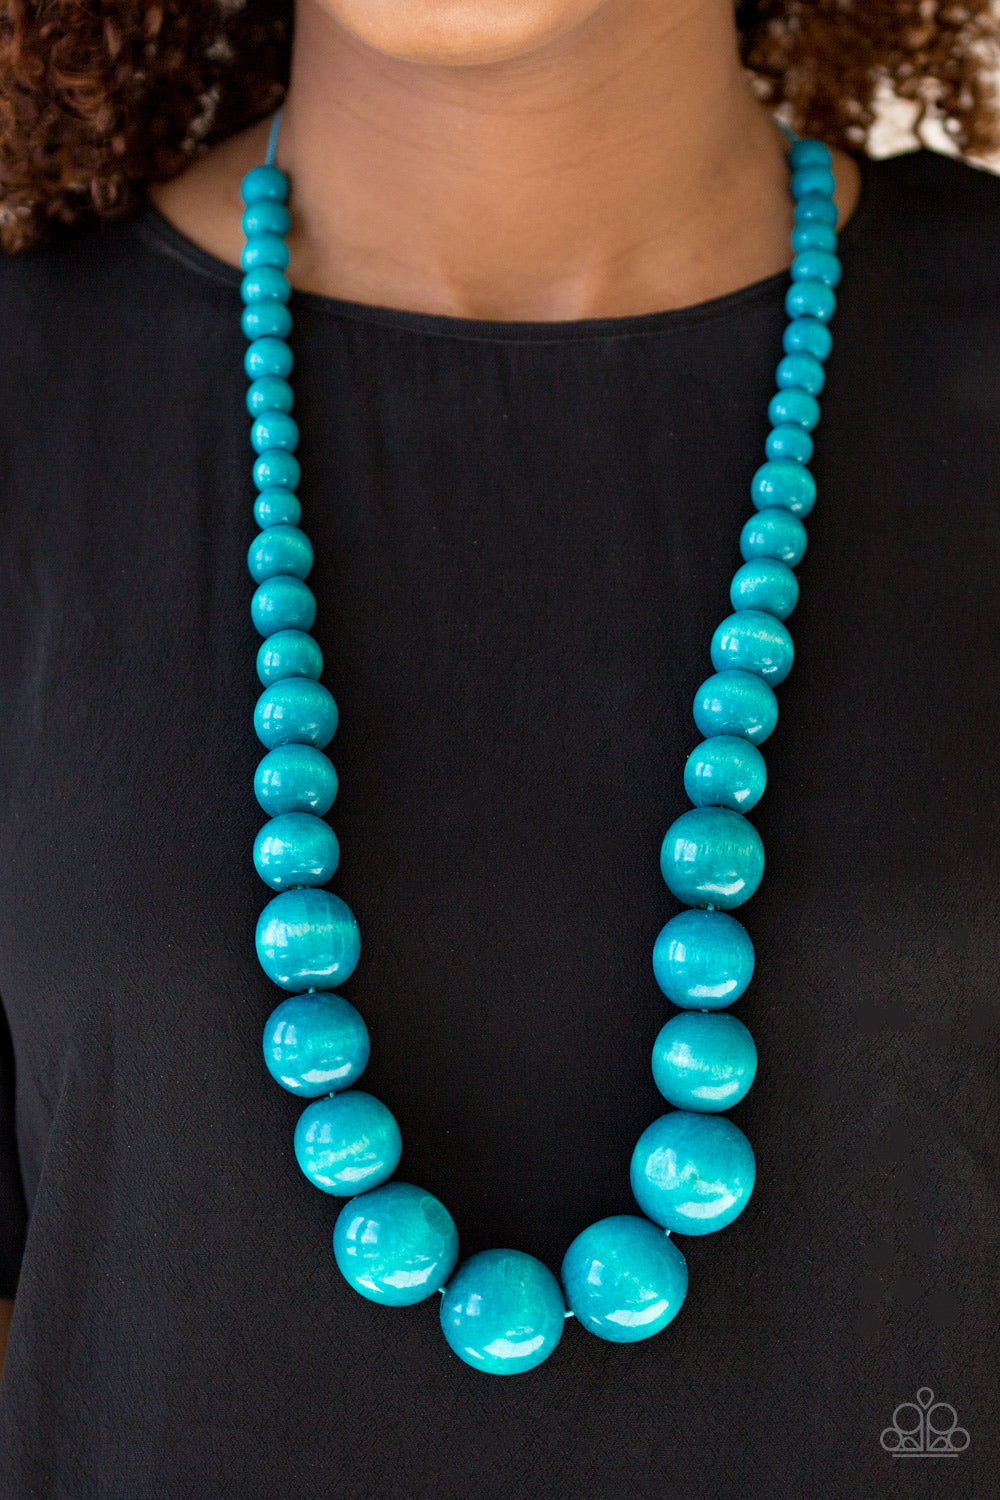 Paparazzi Effortlessly Everglades - Blue Wooden Beads - Necklace and matching Earrings - $5 Jewelry With Ashley Swint